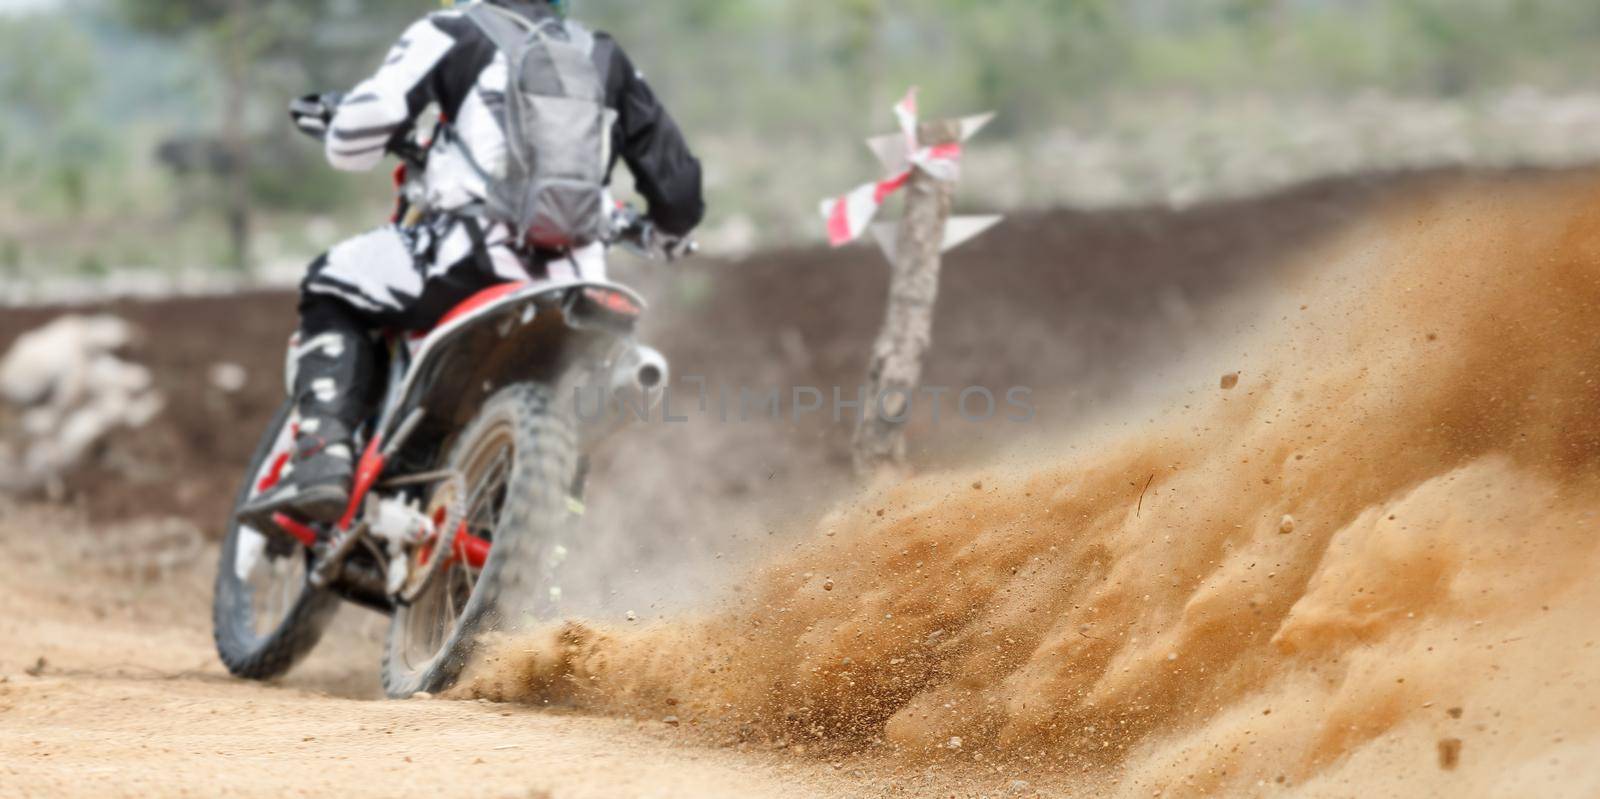 Dust splash from enduro motocycle race by toa55